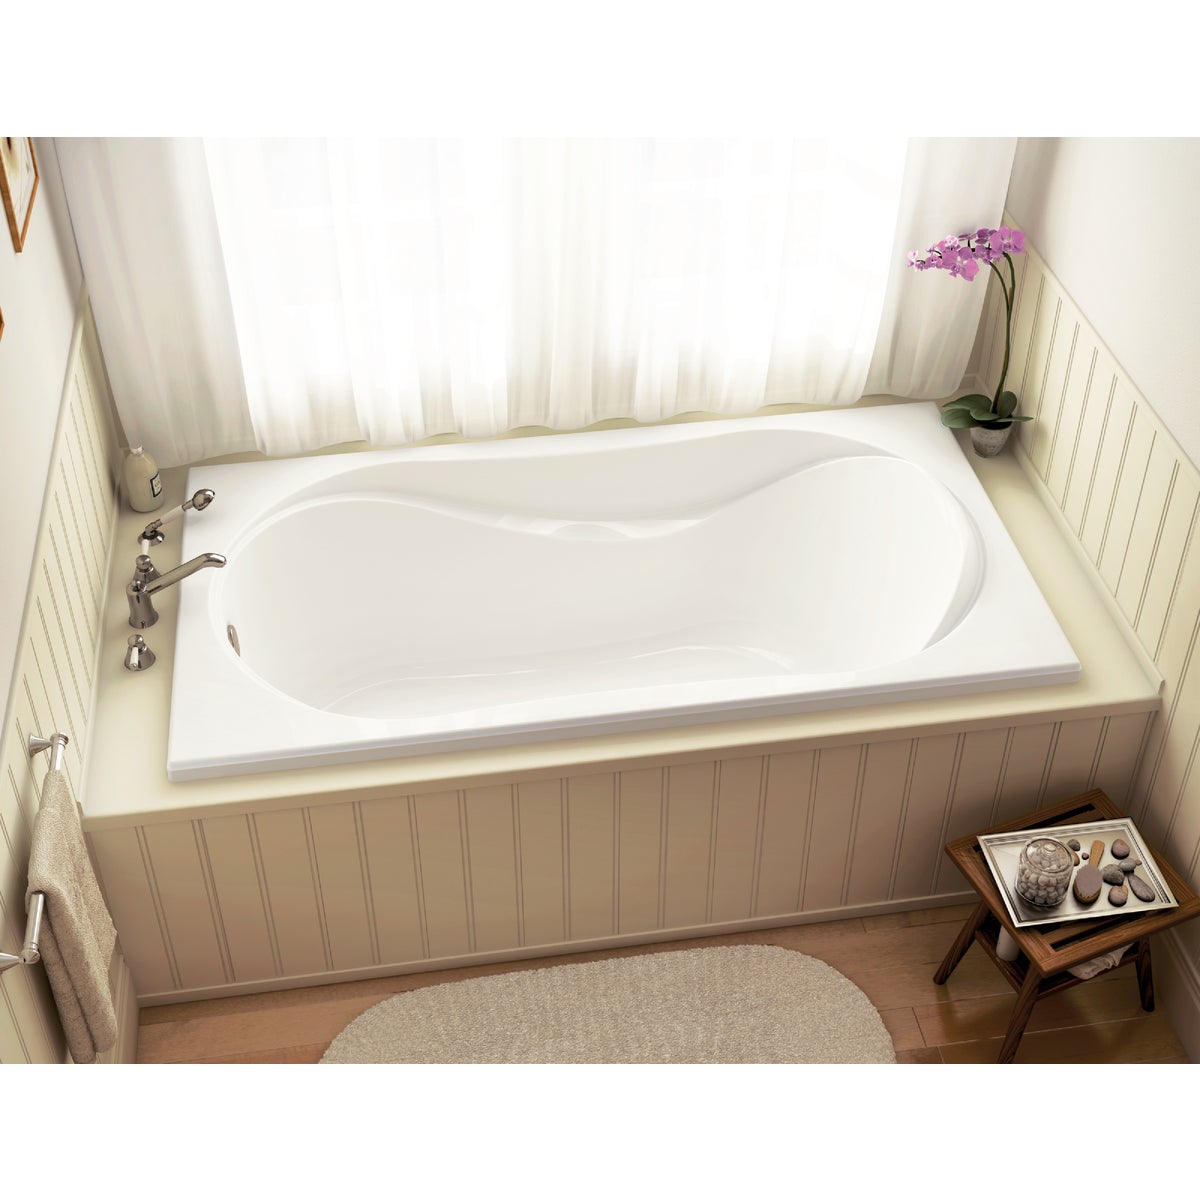 Item 445738, The Cocoon 10-jet acrylic constructed whirlpool is designed to fit into 